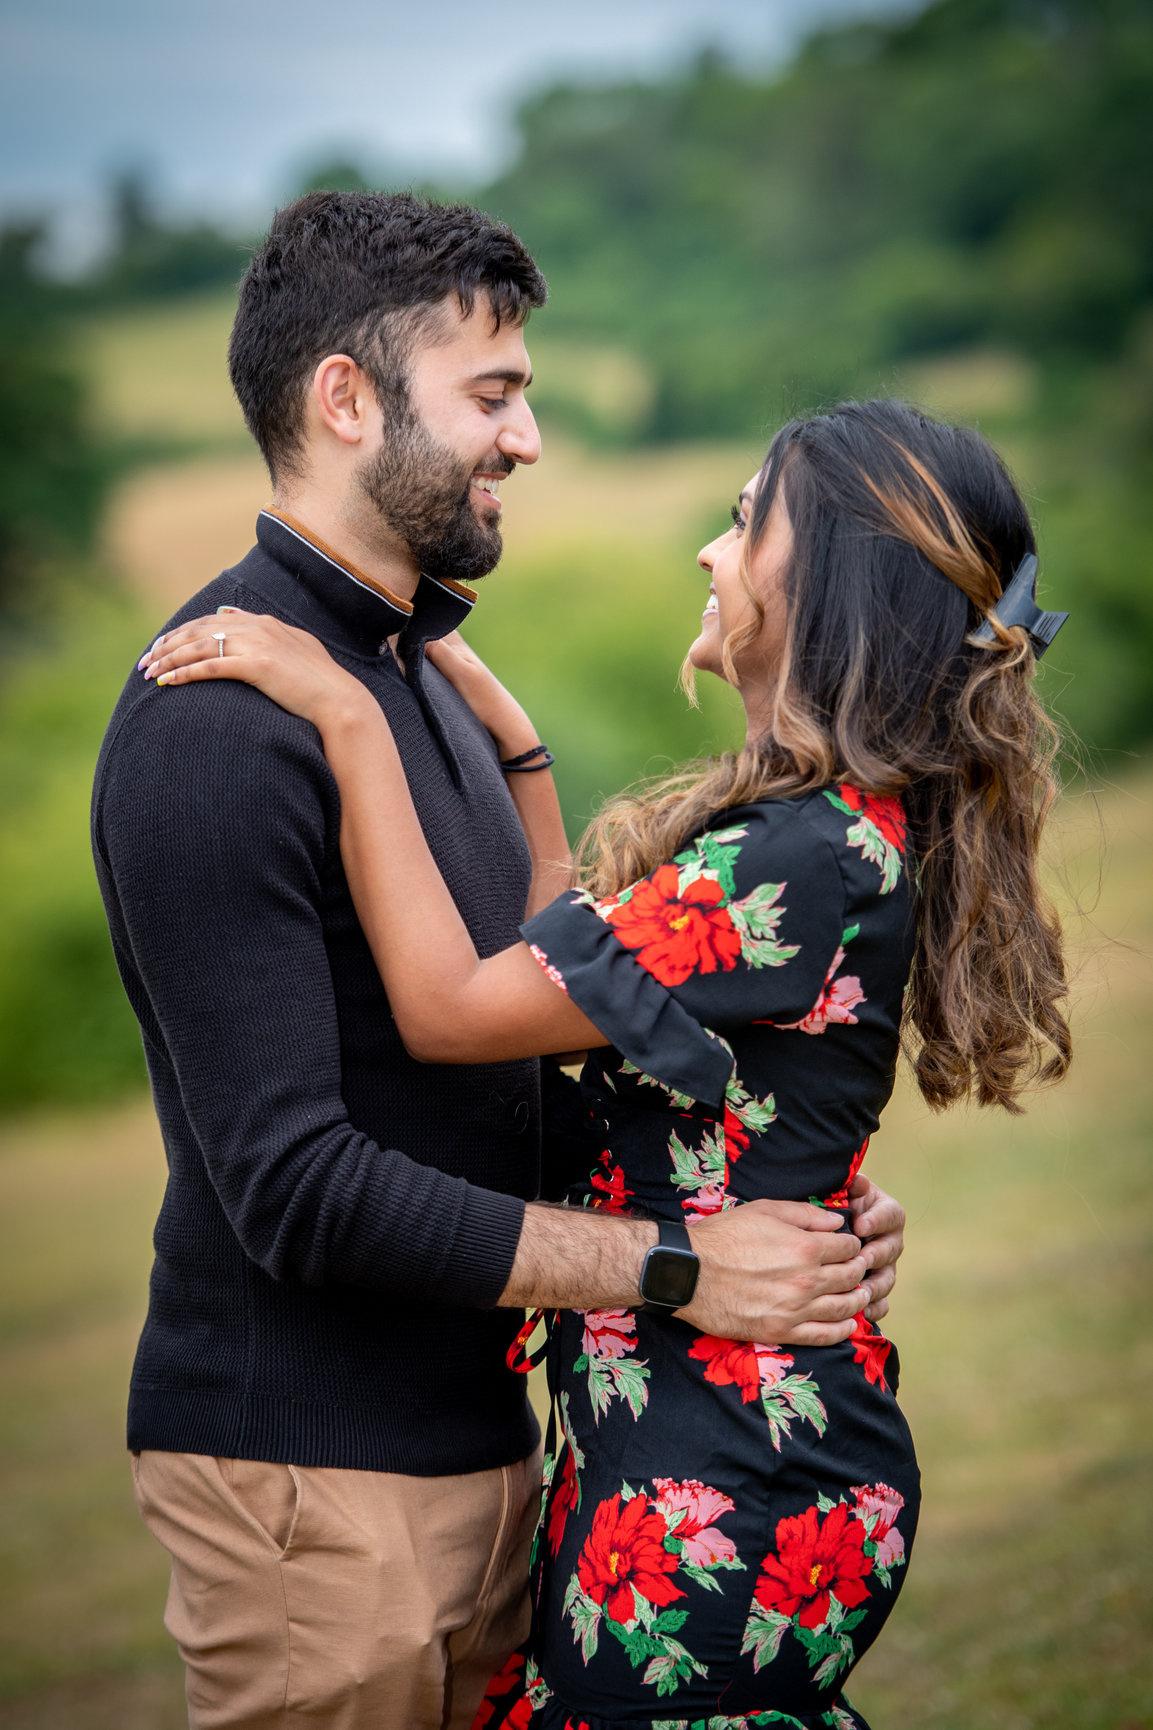 Outdoor Couple Photography Poses | RayCee the Artist